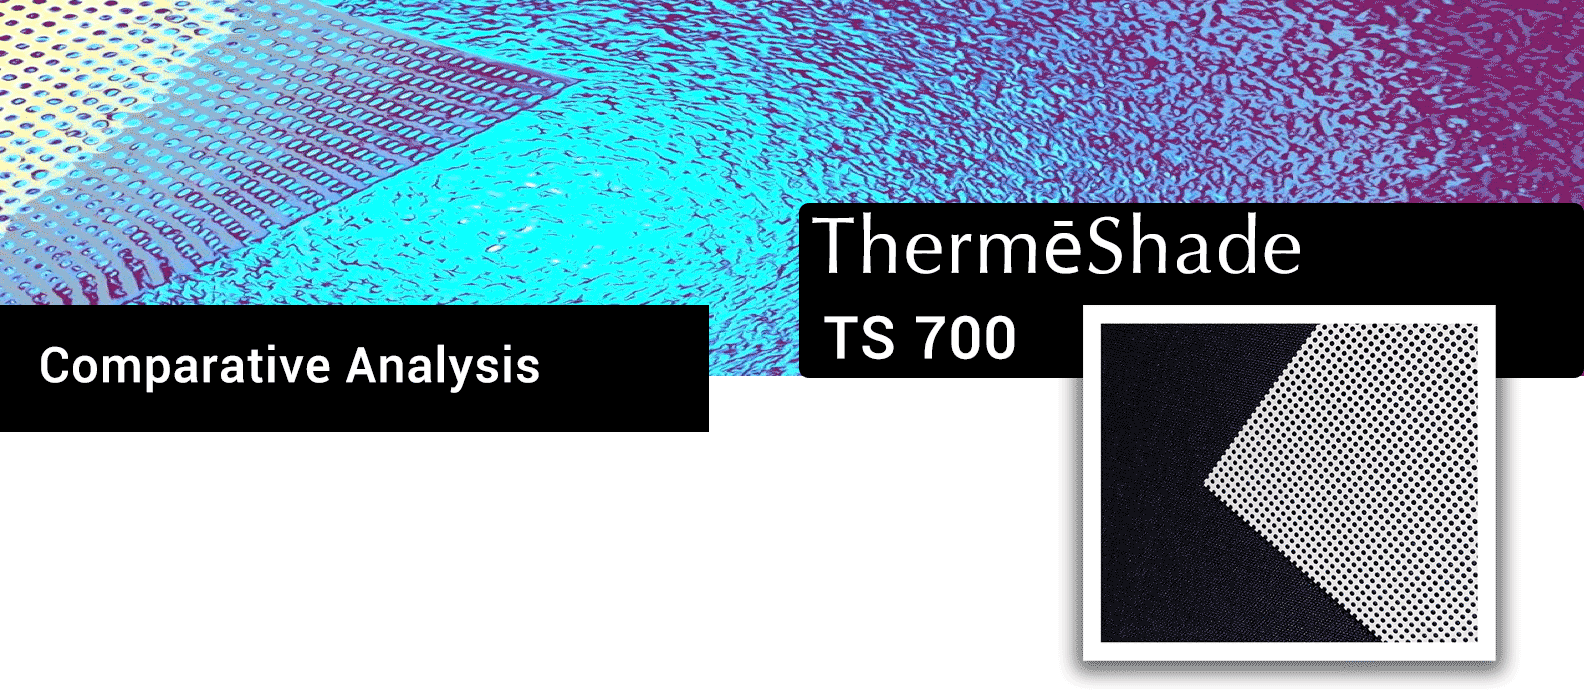 thermshade setion header